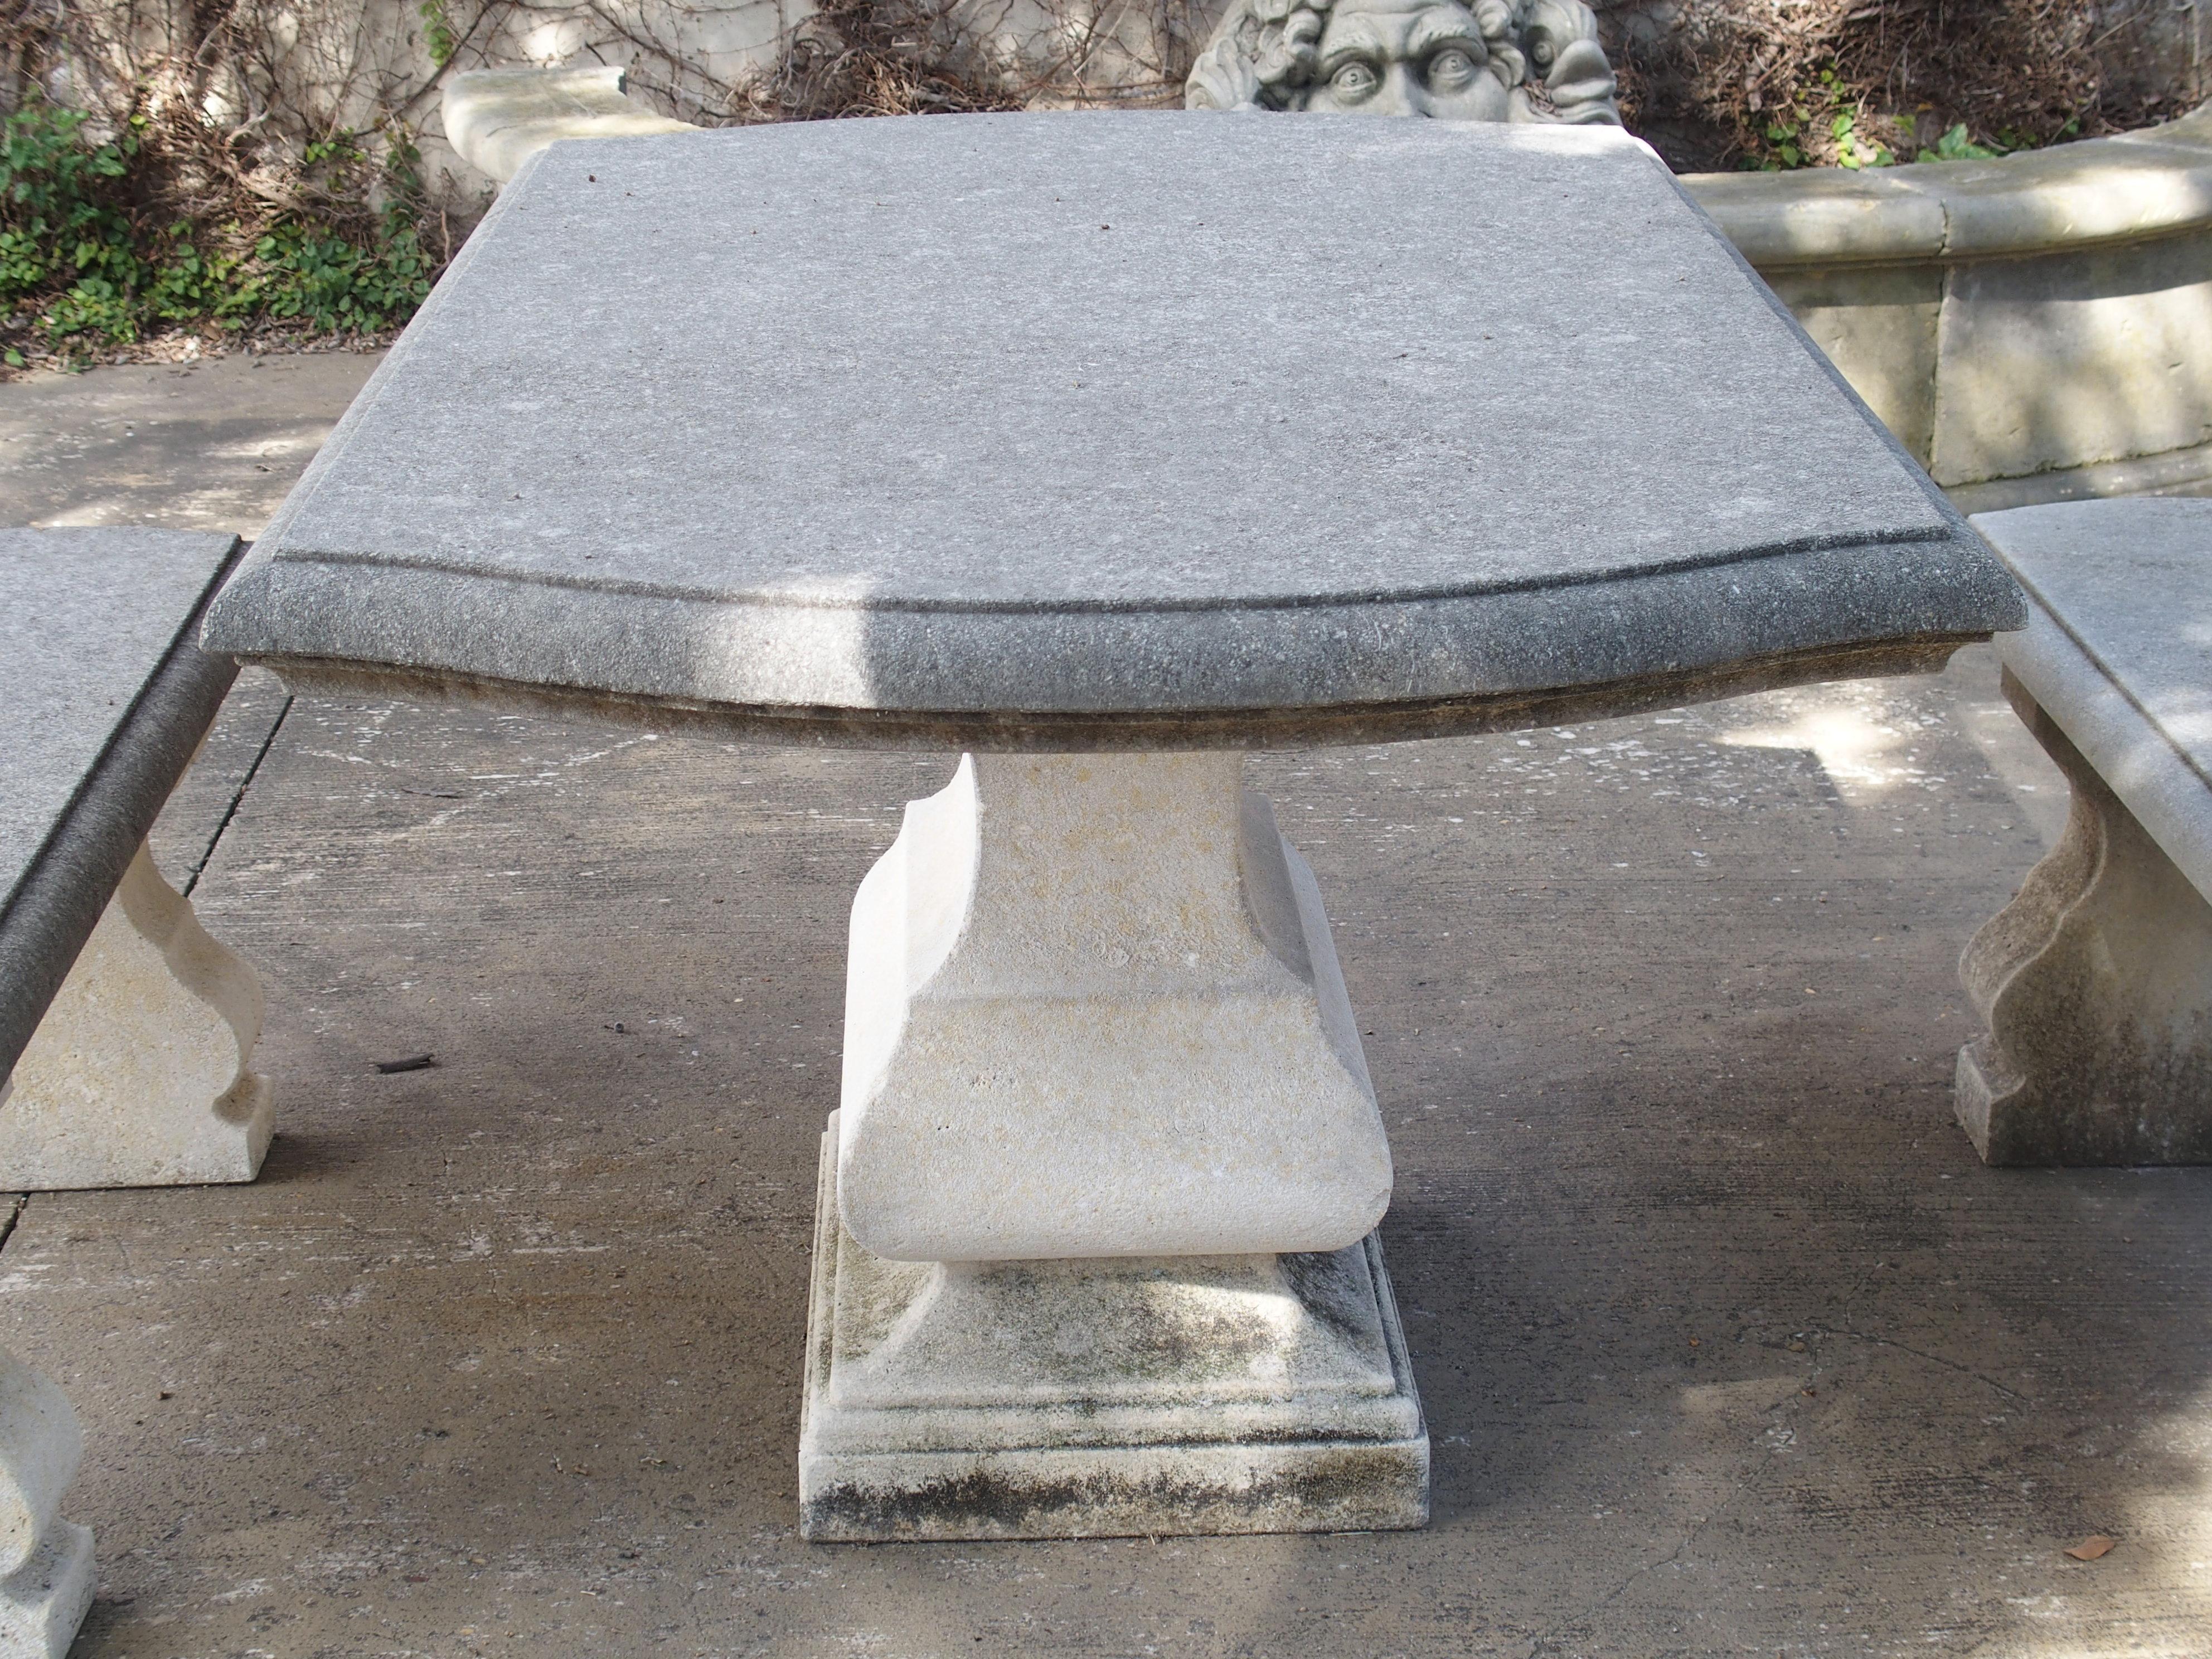 Contemporary Carved Italian Limestone Garden Table with Matching Stone Benches